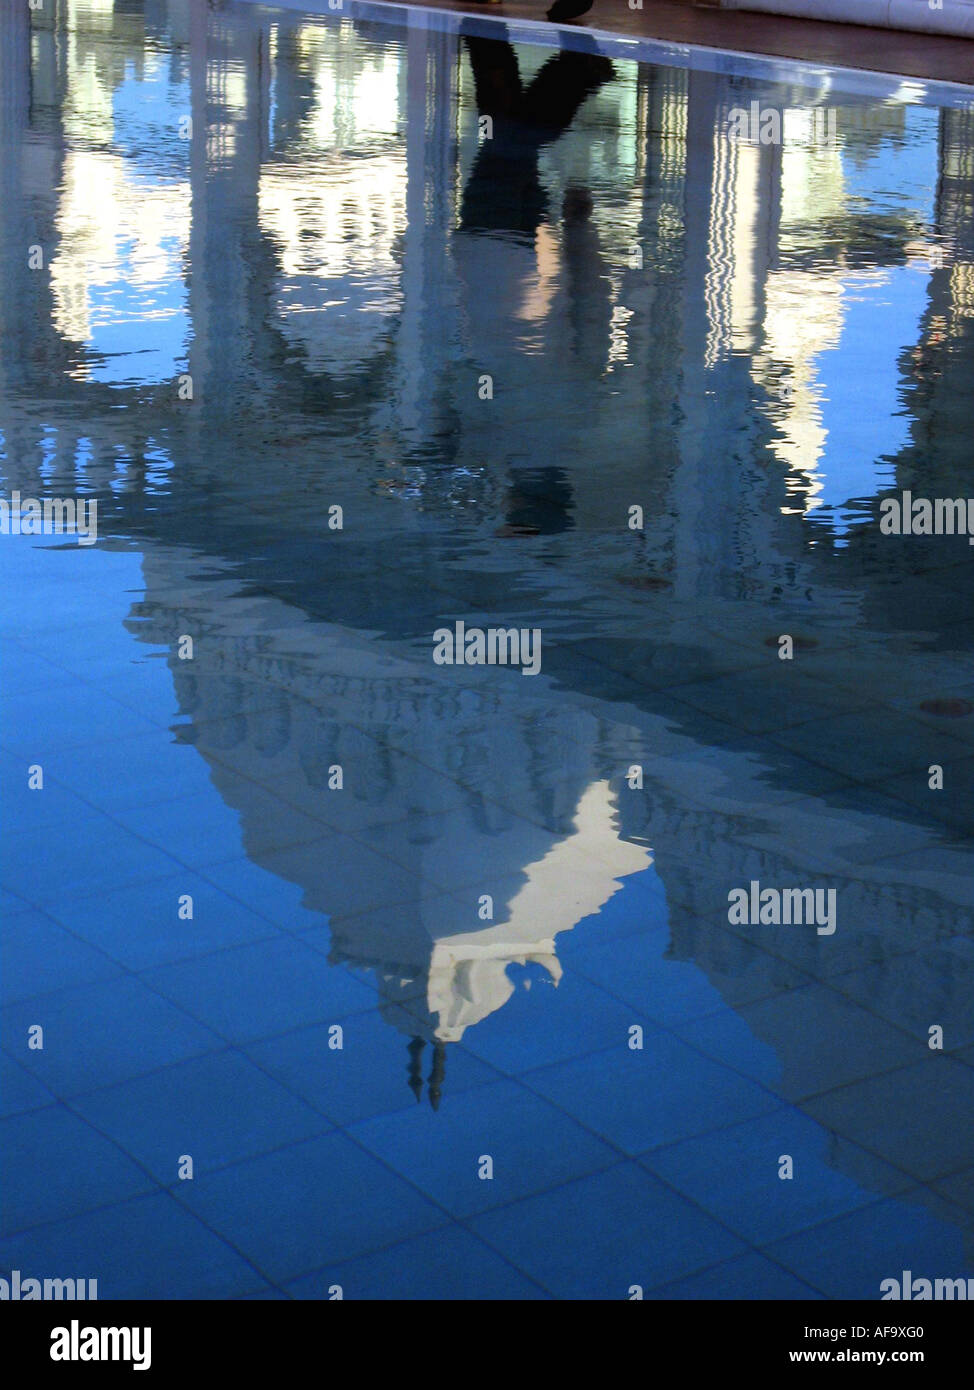 A waiter is reflected in the rooftop pool at the Udai Kothi Hotel, Udaipur. Stock Photo